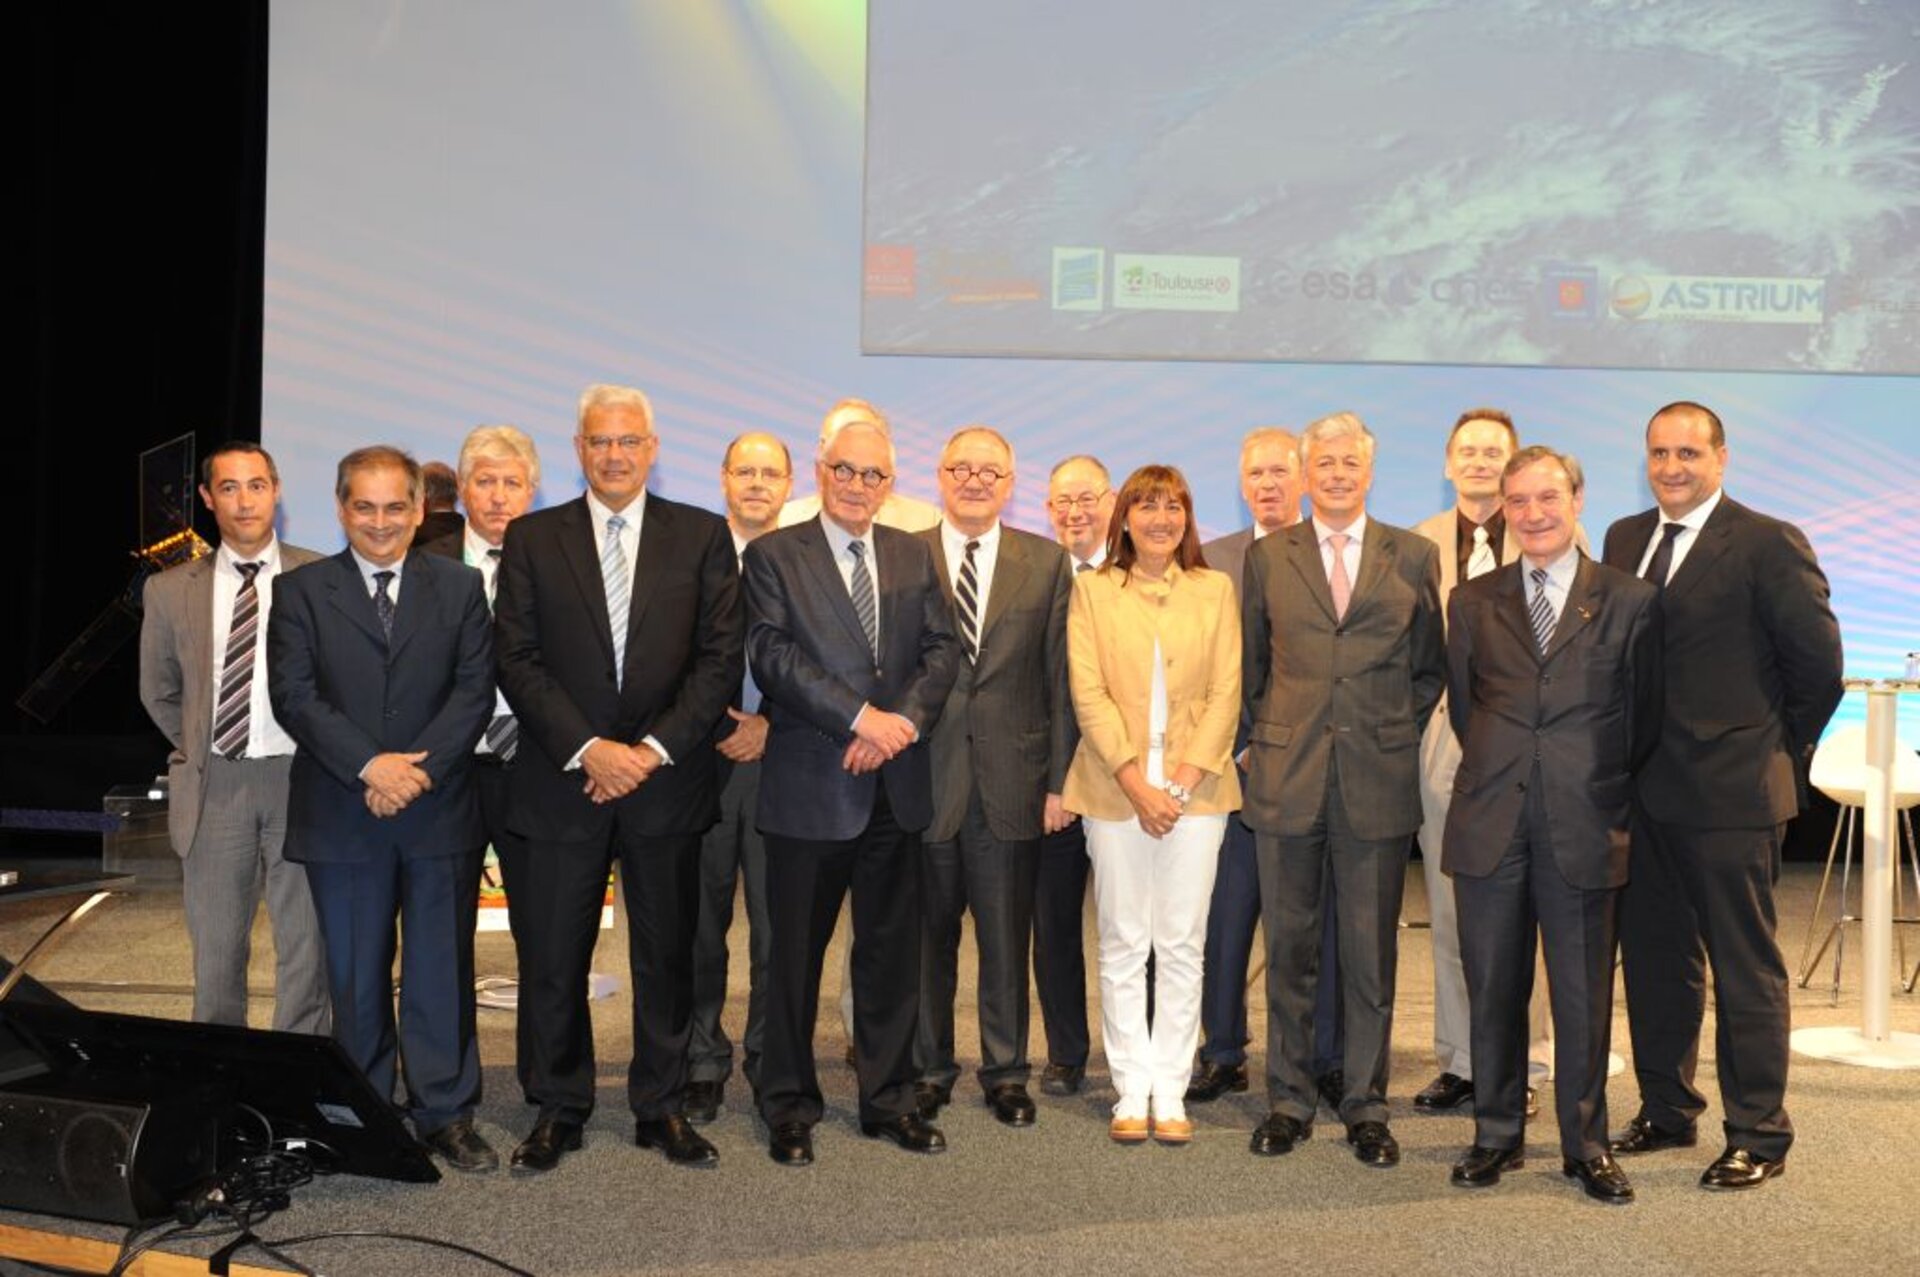 Jean-Jacques Dordain, ESA Director General with authorities from the Toulouse region and the space community